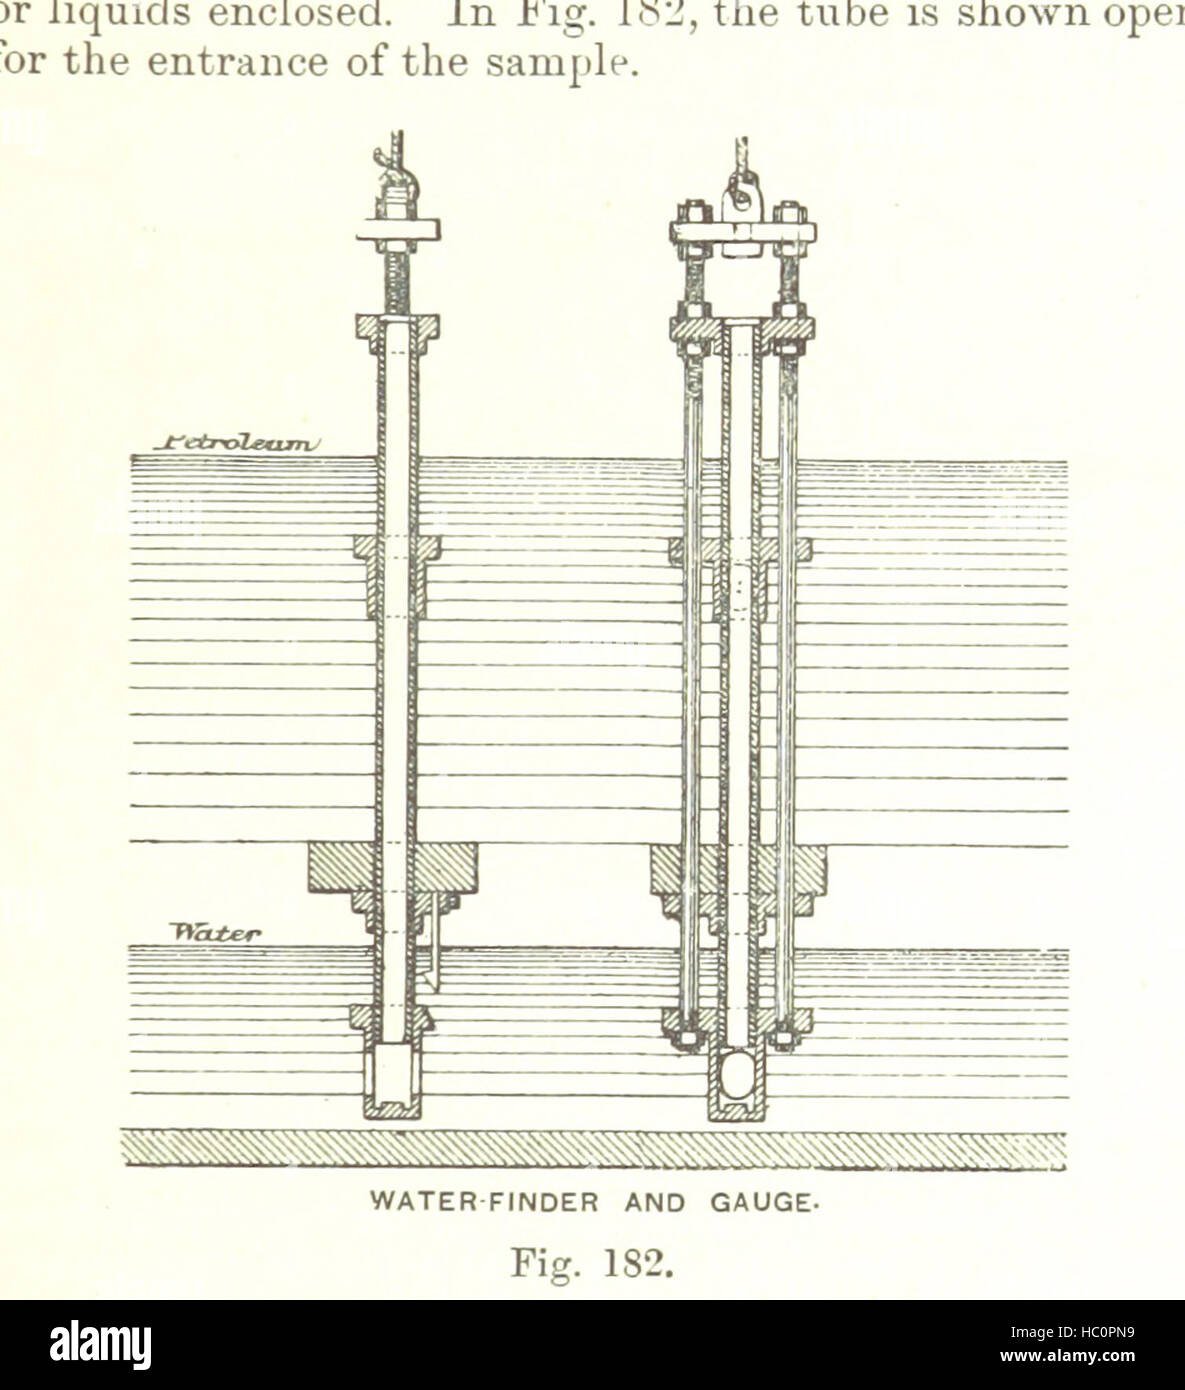 Image taken from page 135 of 'Petroleum: a treatise on the geographical distribution and geological occurrence of petroleum and natural gas ... By B. Redwood, assisted by G. T. Holloway, and other contributors ... With maps, etc' Image taken from page 135 of 'Petroleum a treatise on Stock Photo